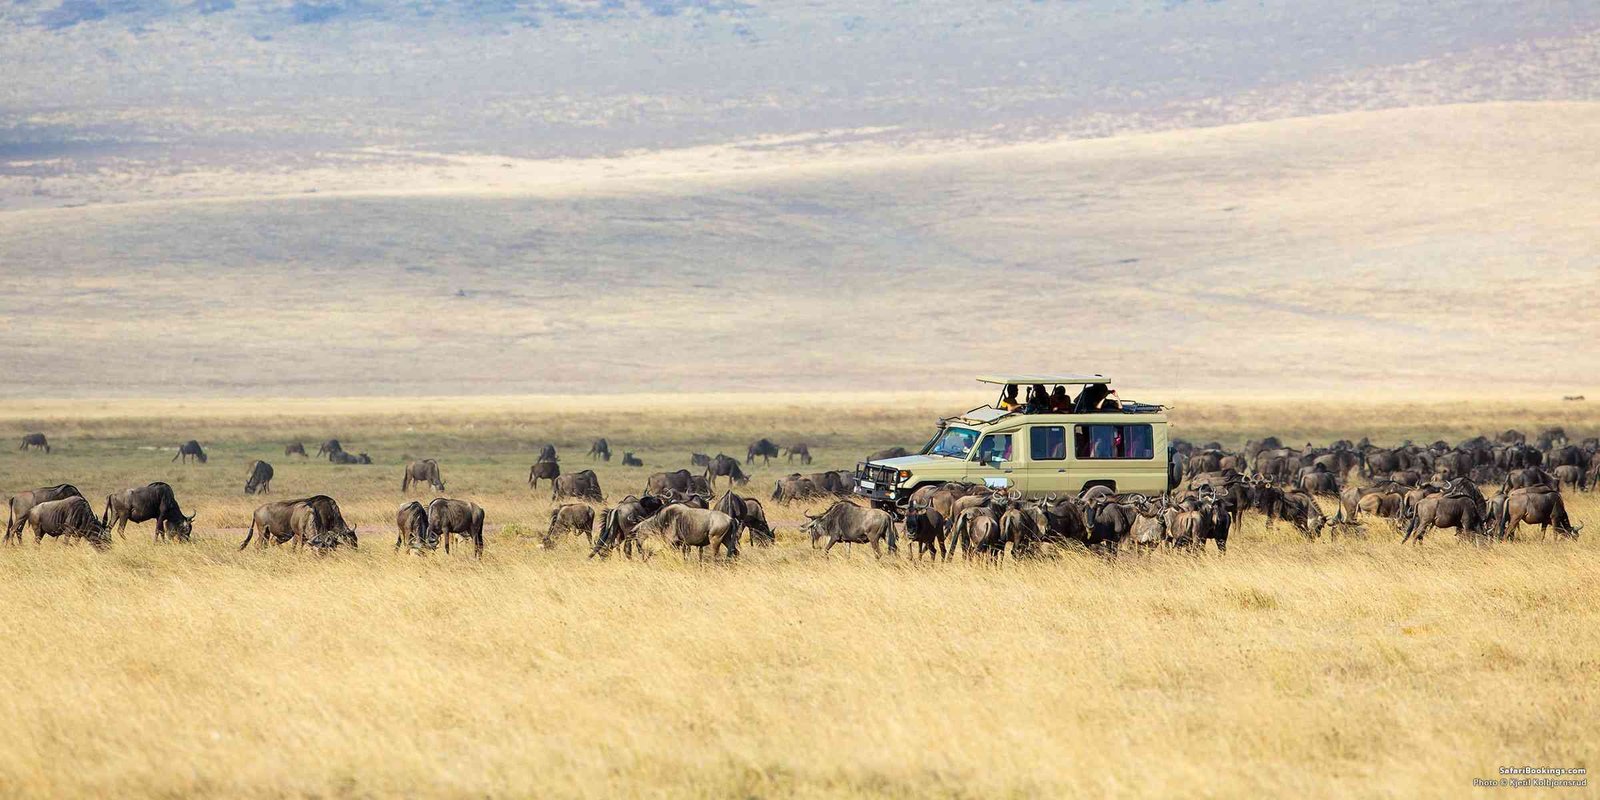 What Are The Three Major Tourist Attractions In Tanzania